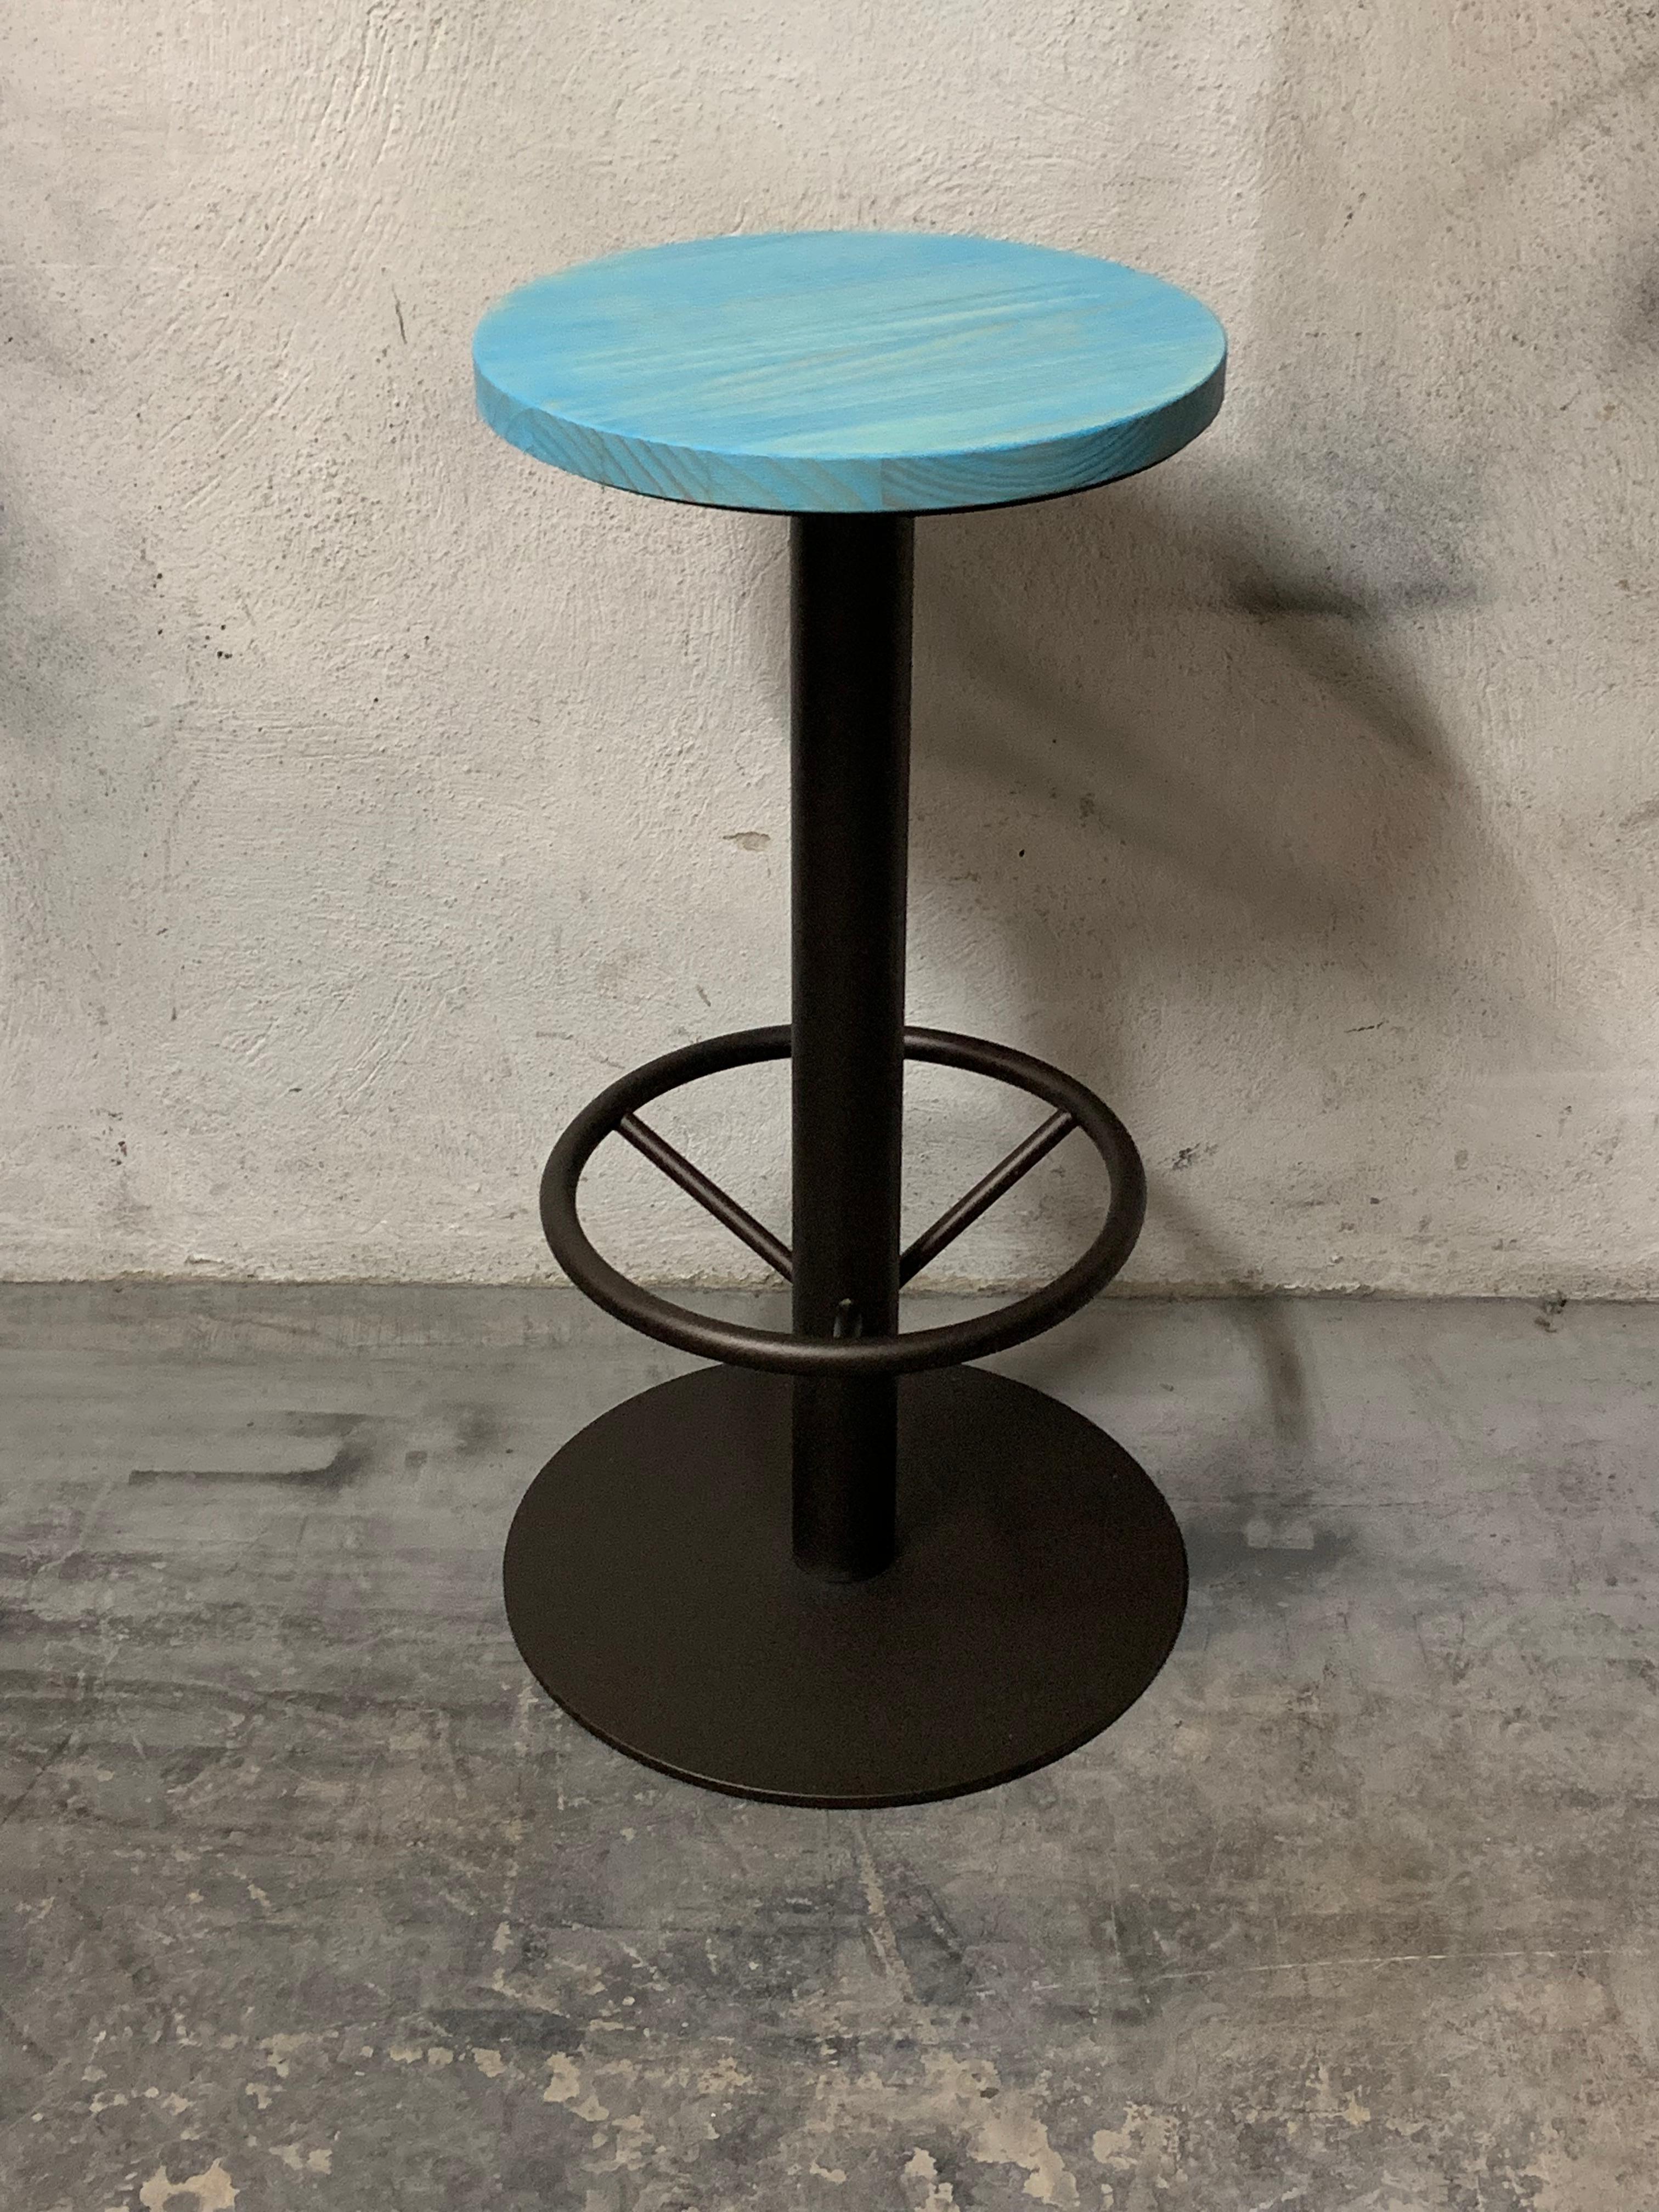 Spanish New Industrial Wrought Iron Shop Stool with Pine Wood Seat For Sale